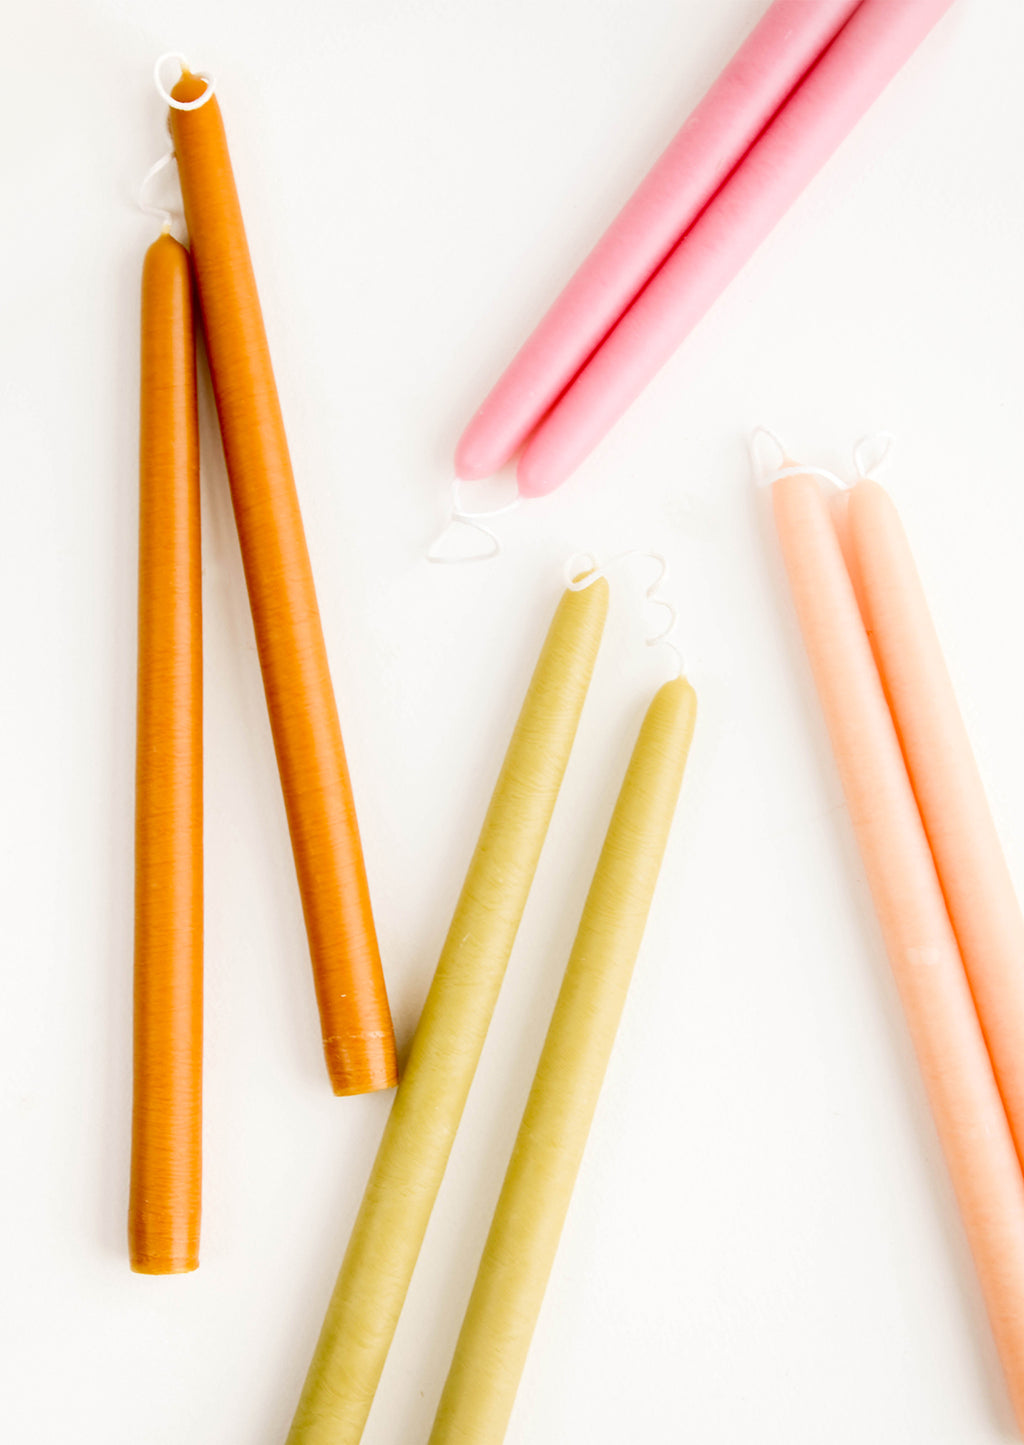 3: An arrangement of colorful taper candles